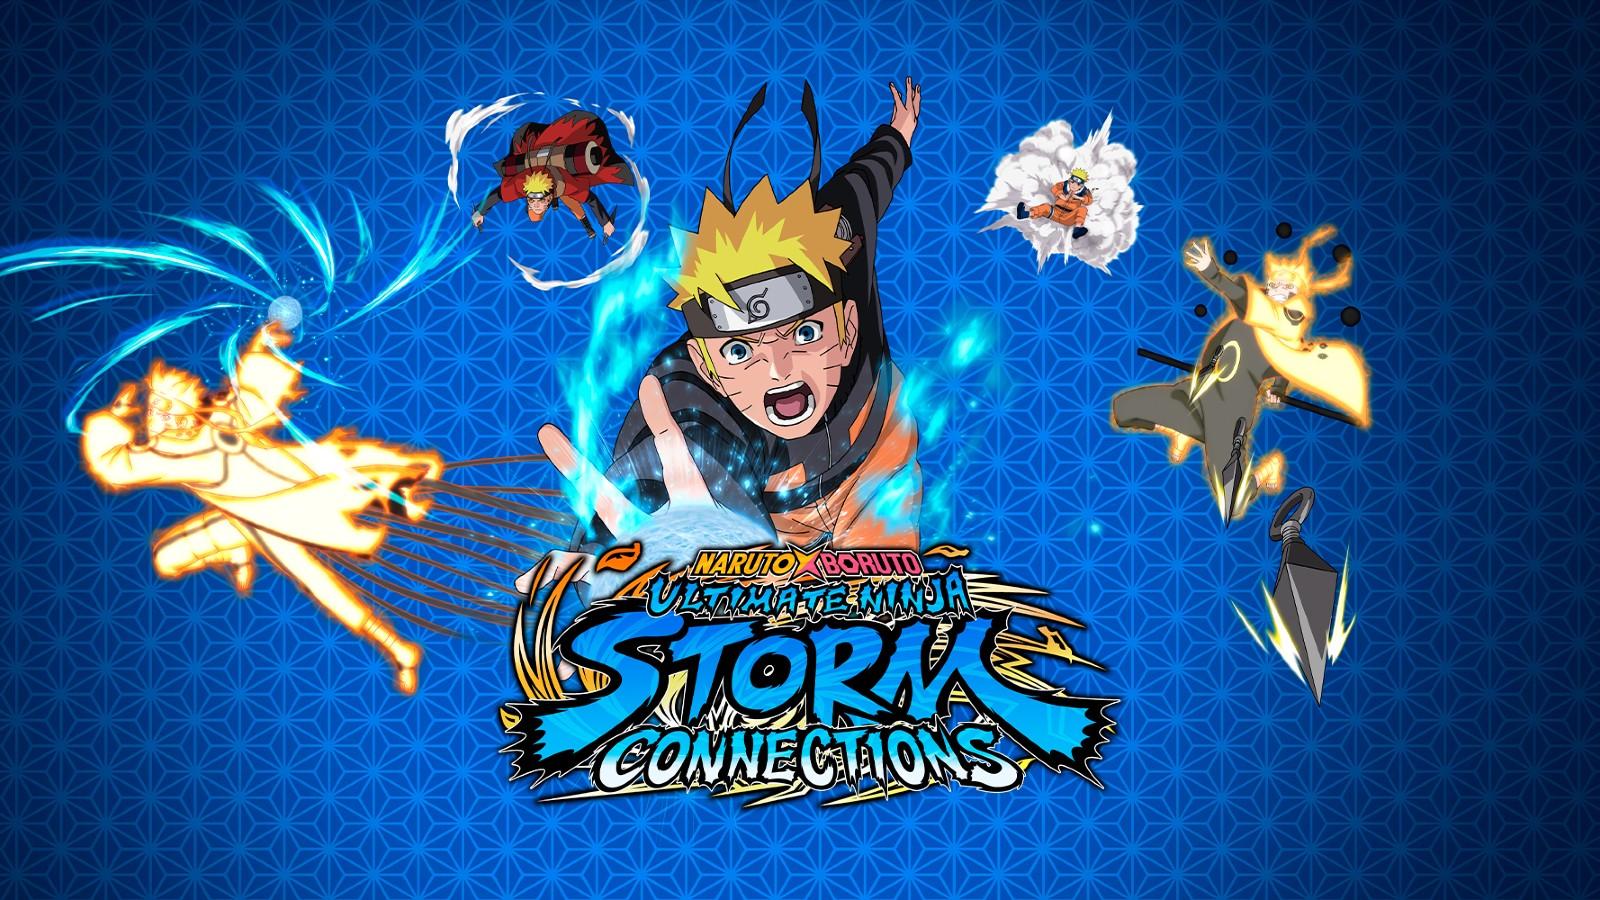 Naruto Storm Connections Roster Wallpaper by yoink17 on DeviantArt